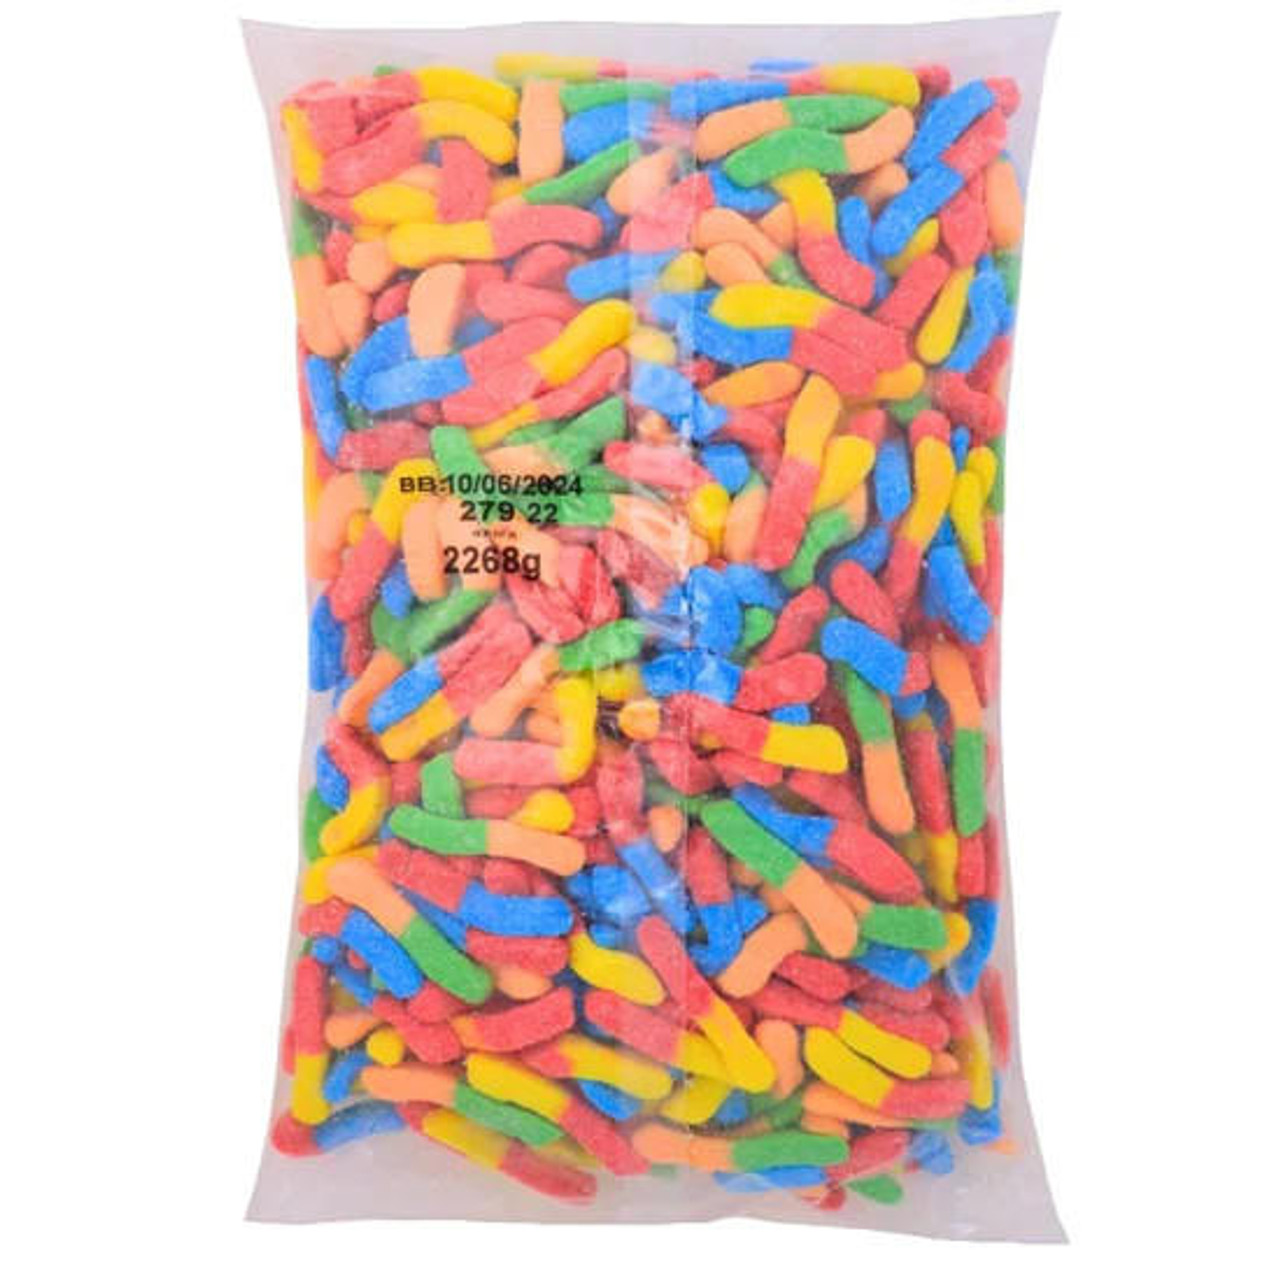  Kervan Neon Sour Gummy Worms 5 lb. - 4/Case - Tangy and Vibrant Dessert Topping 